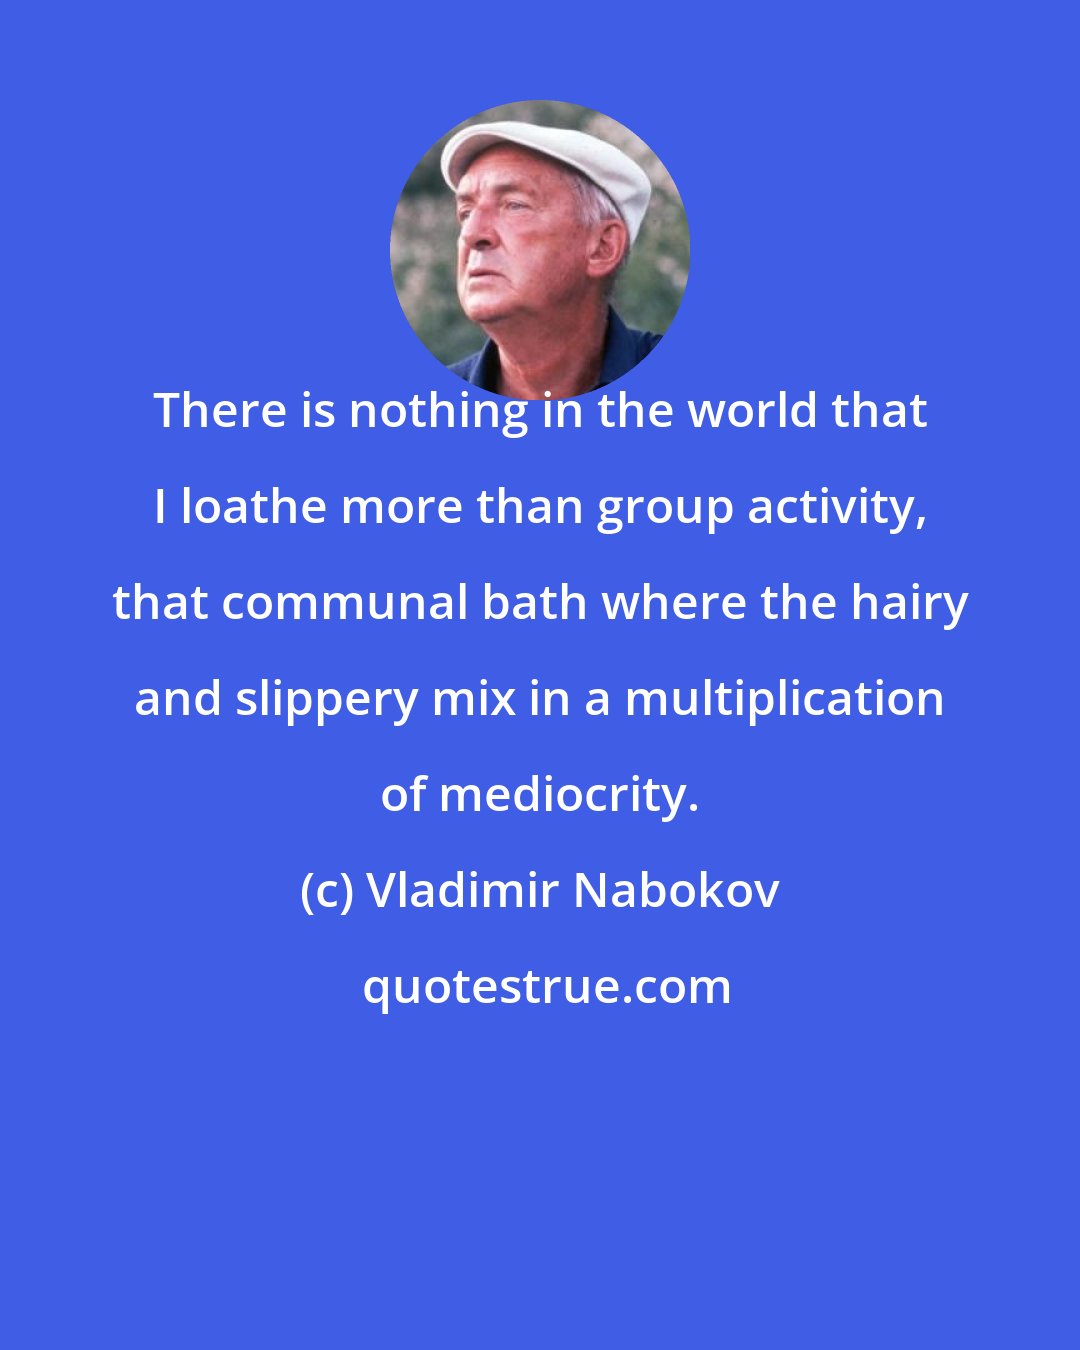 Vladimir Nabokov: There is nothing in the world that I loathe more than group activity, that communal bath where the hairy and slippery mix in a multiplication of mediocrity.